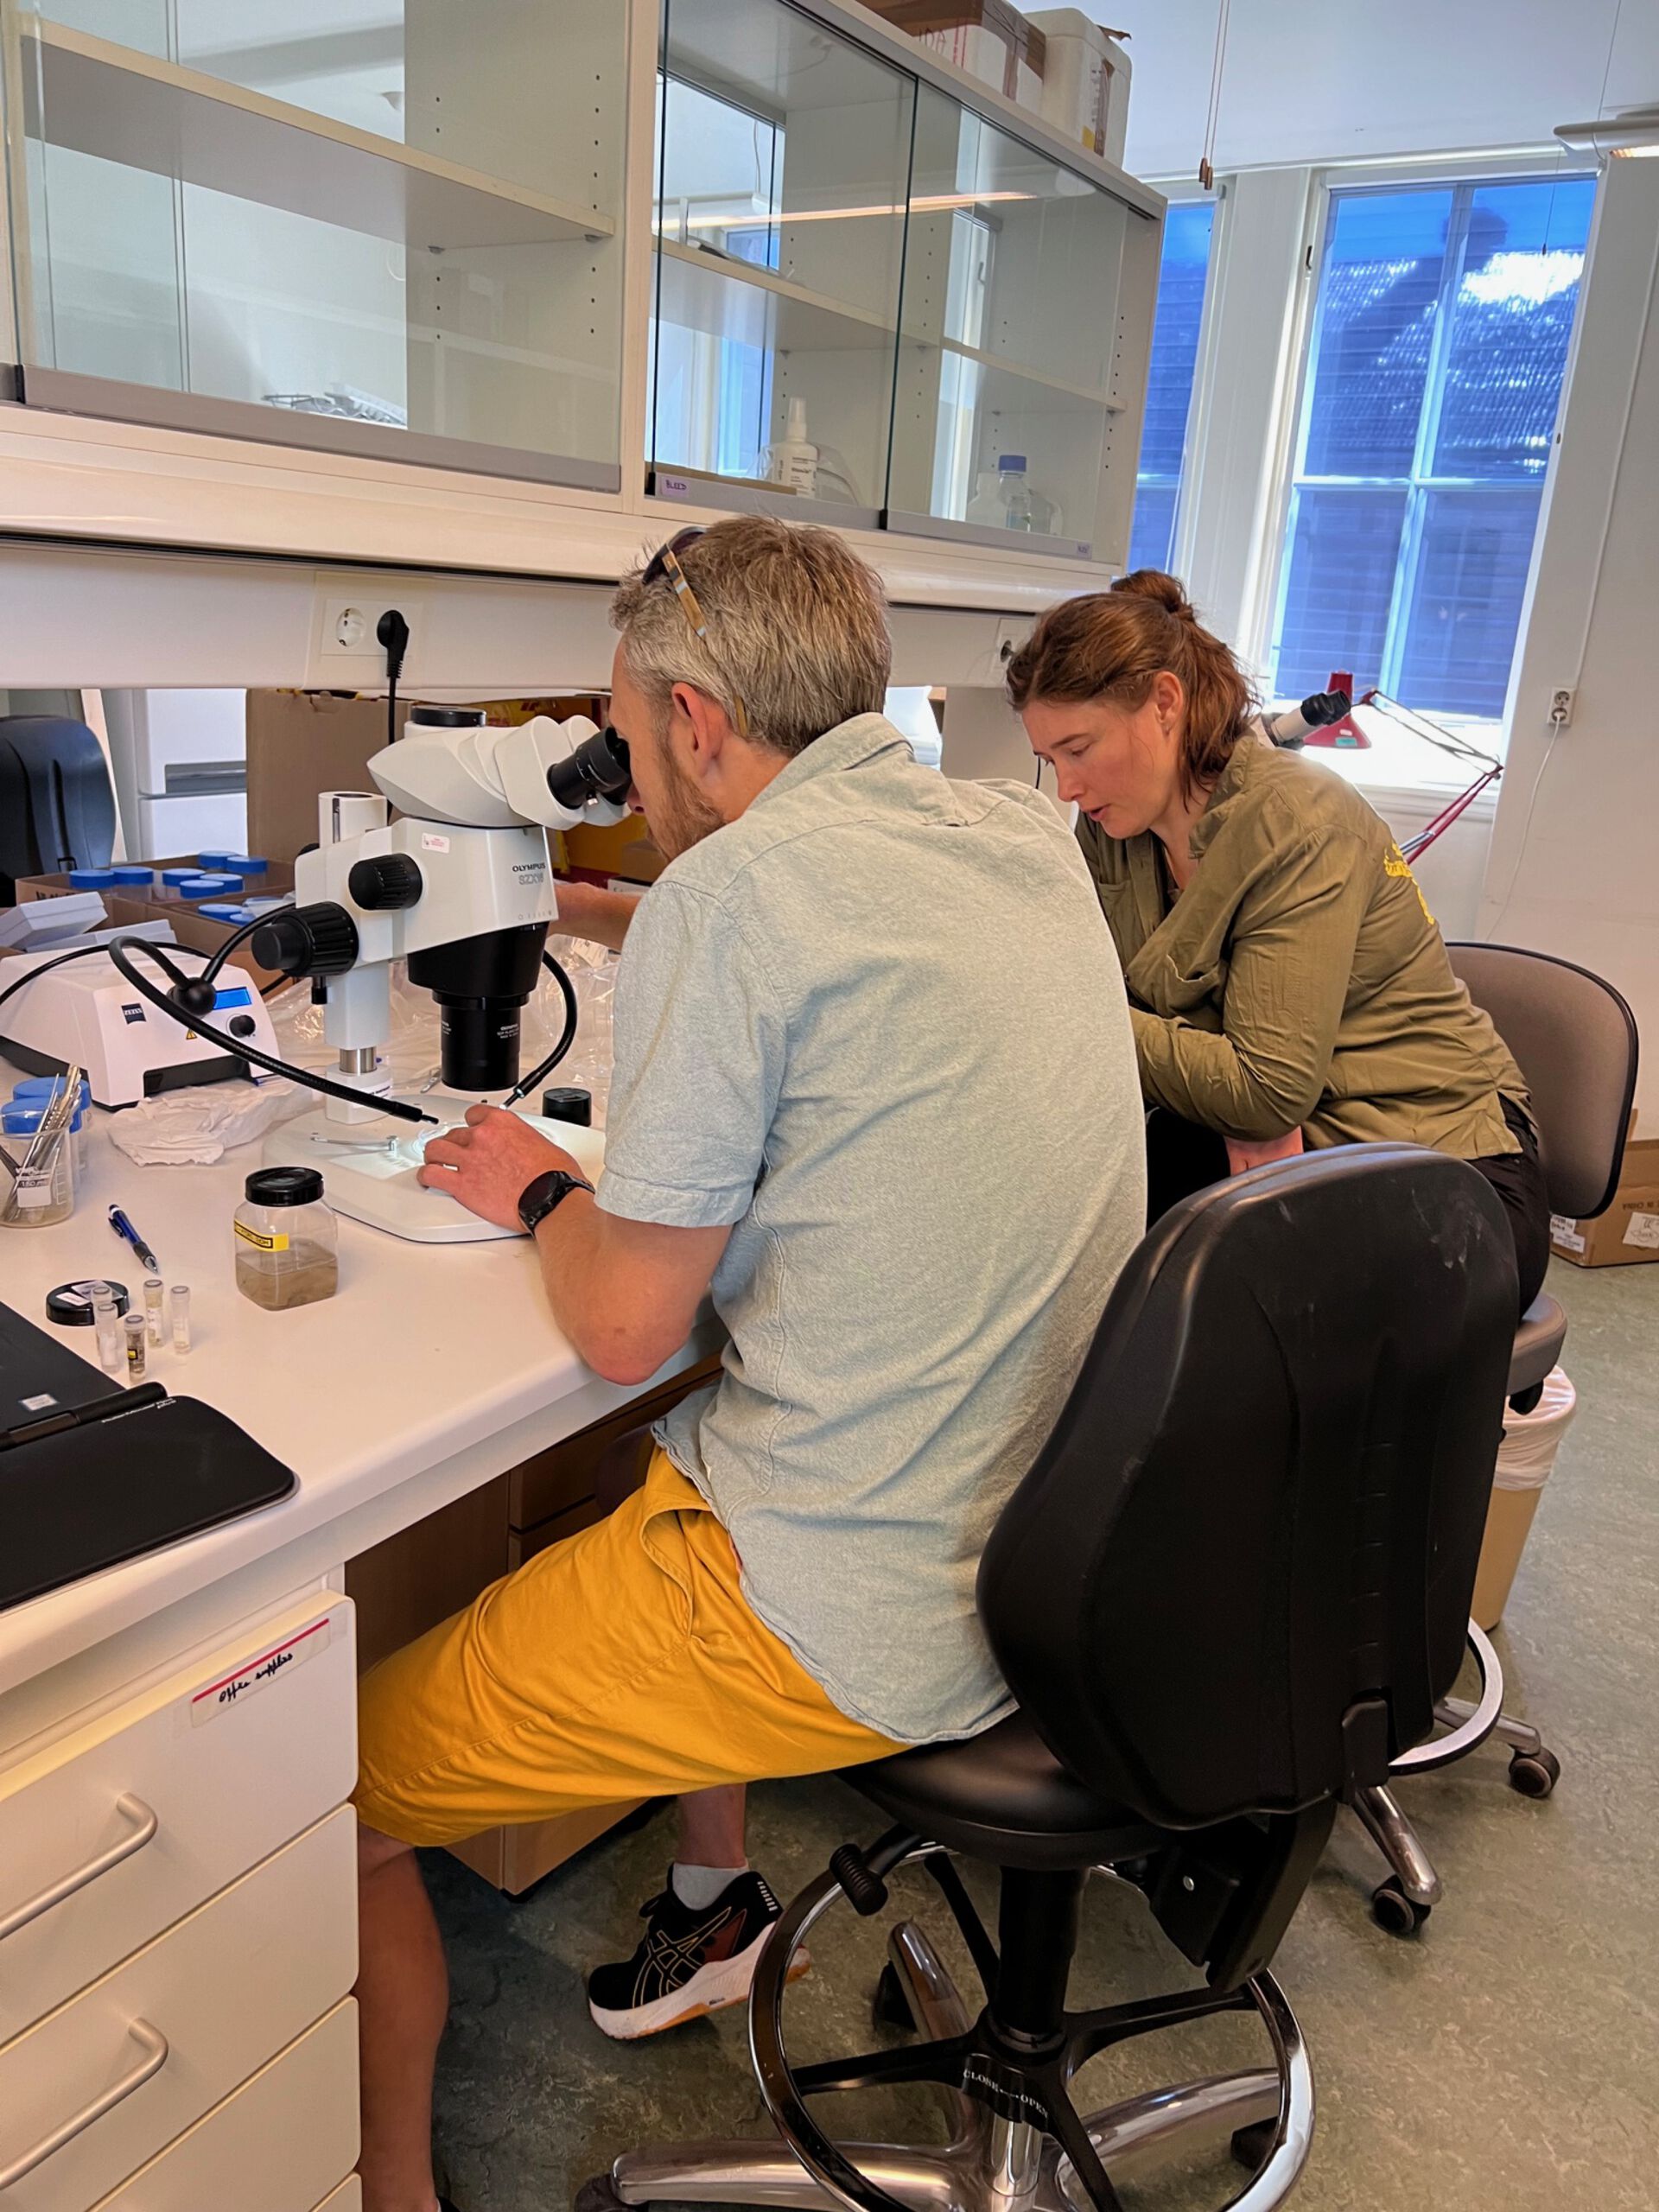 A photo of a man in a lab room looking at bryozoans under a stereo microscope and a woman next to him looking down at some bryozoan literature